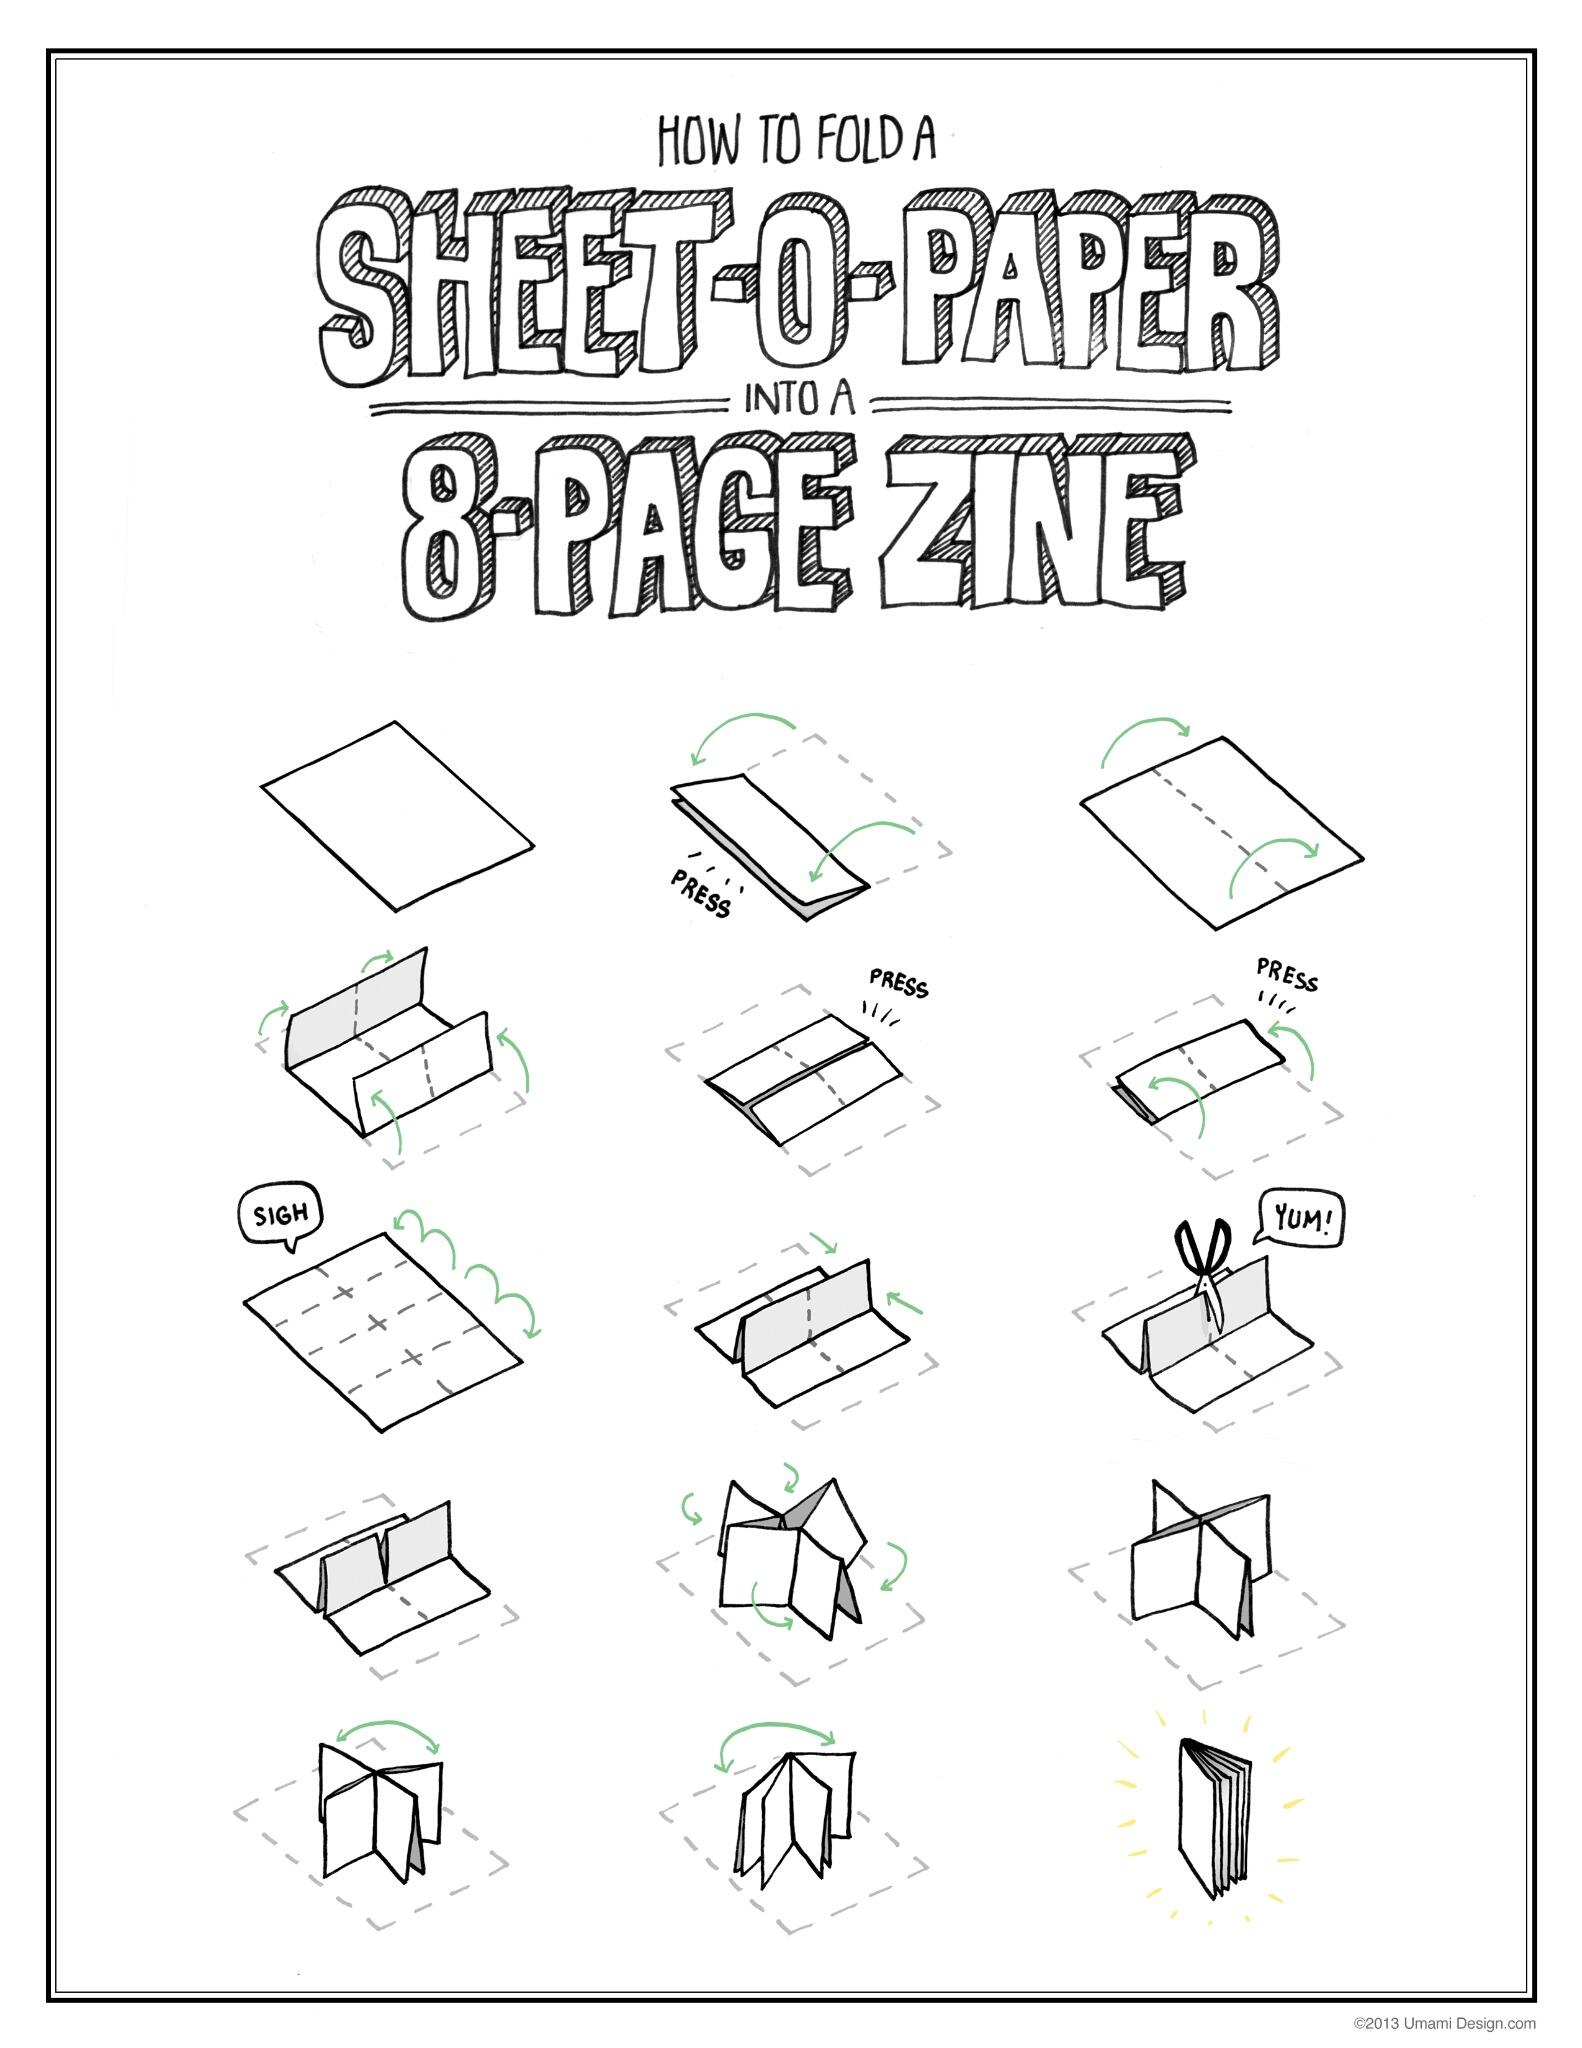 Chattanooga ZineFest on Twitter "Here's a helpful guide on making an 8